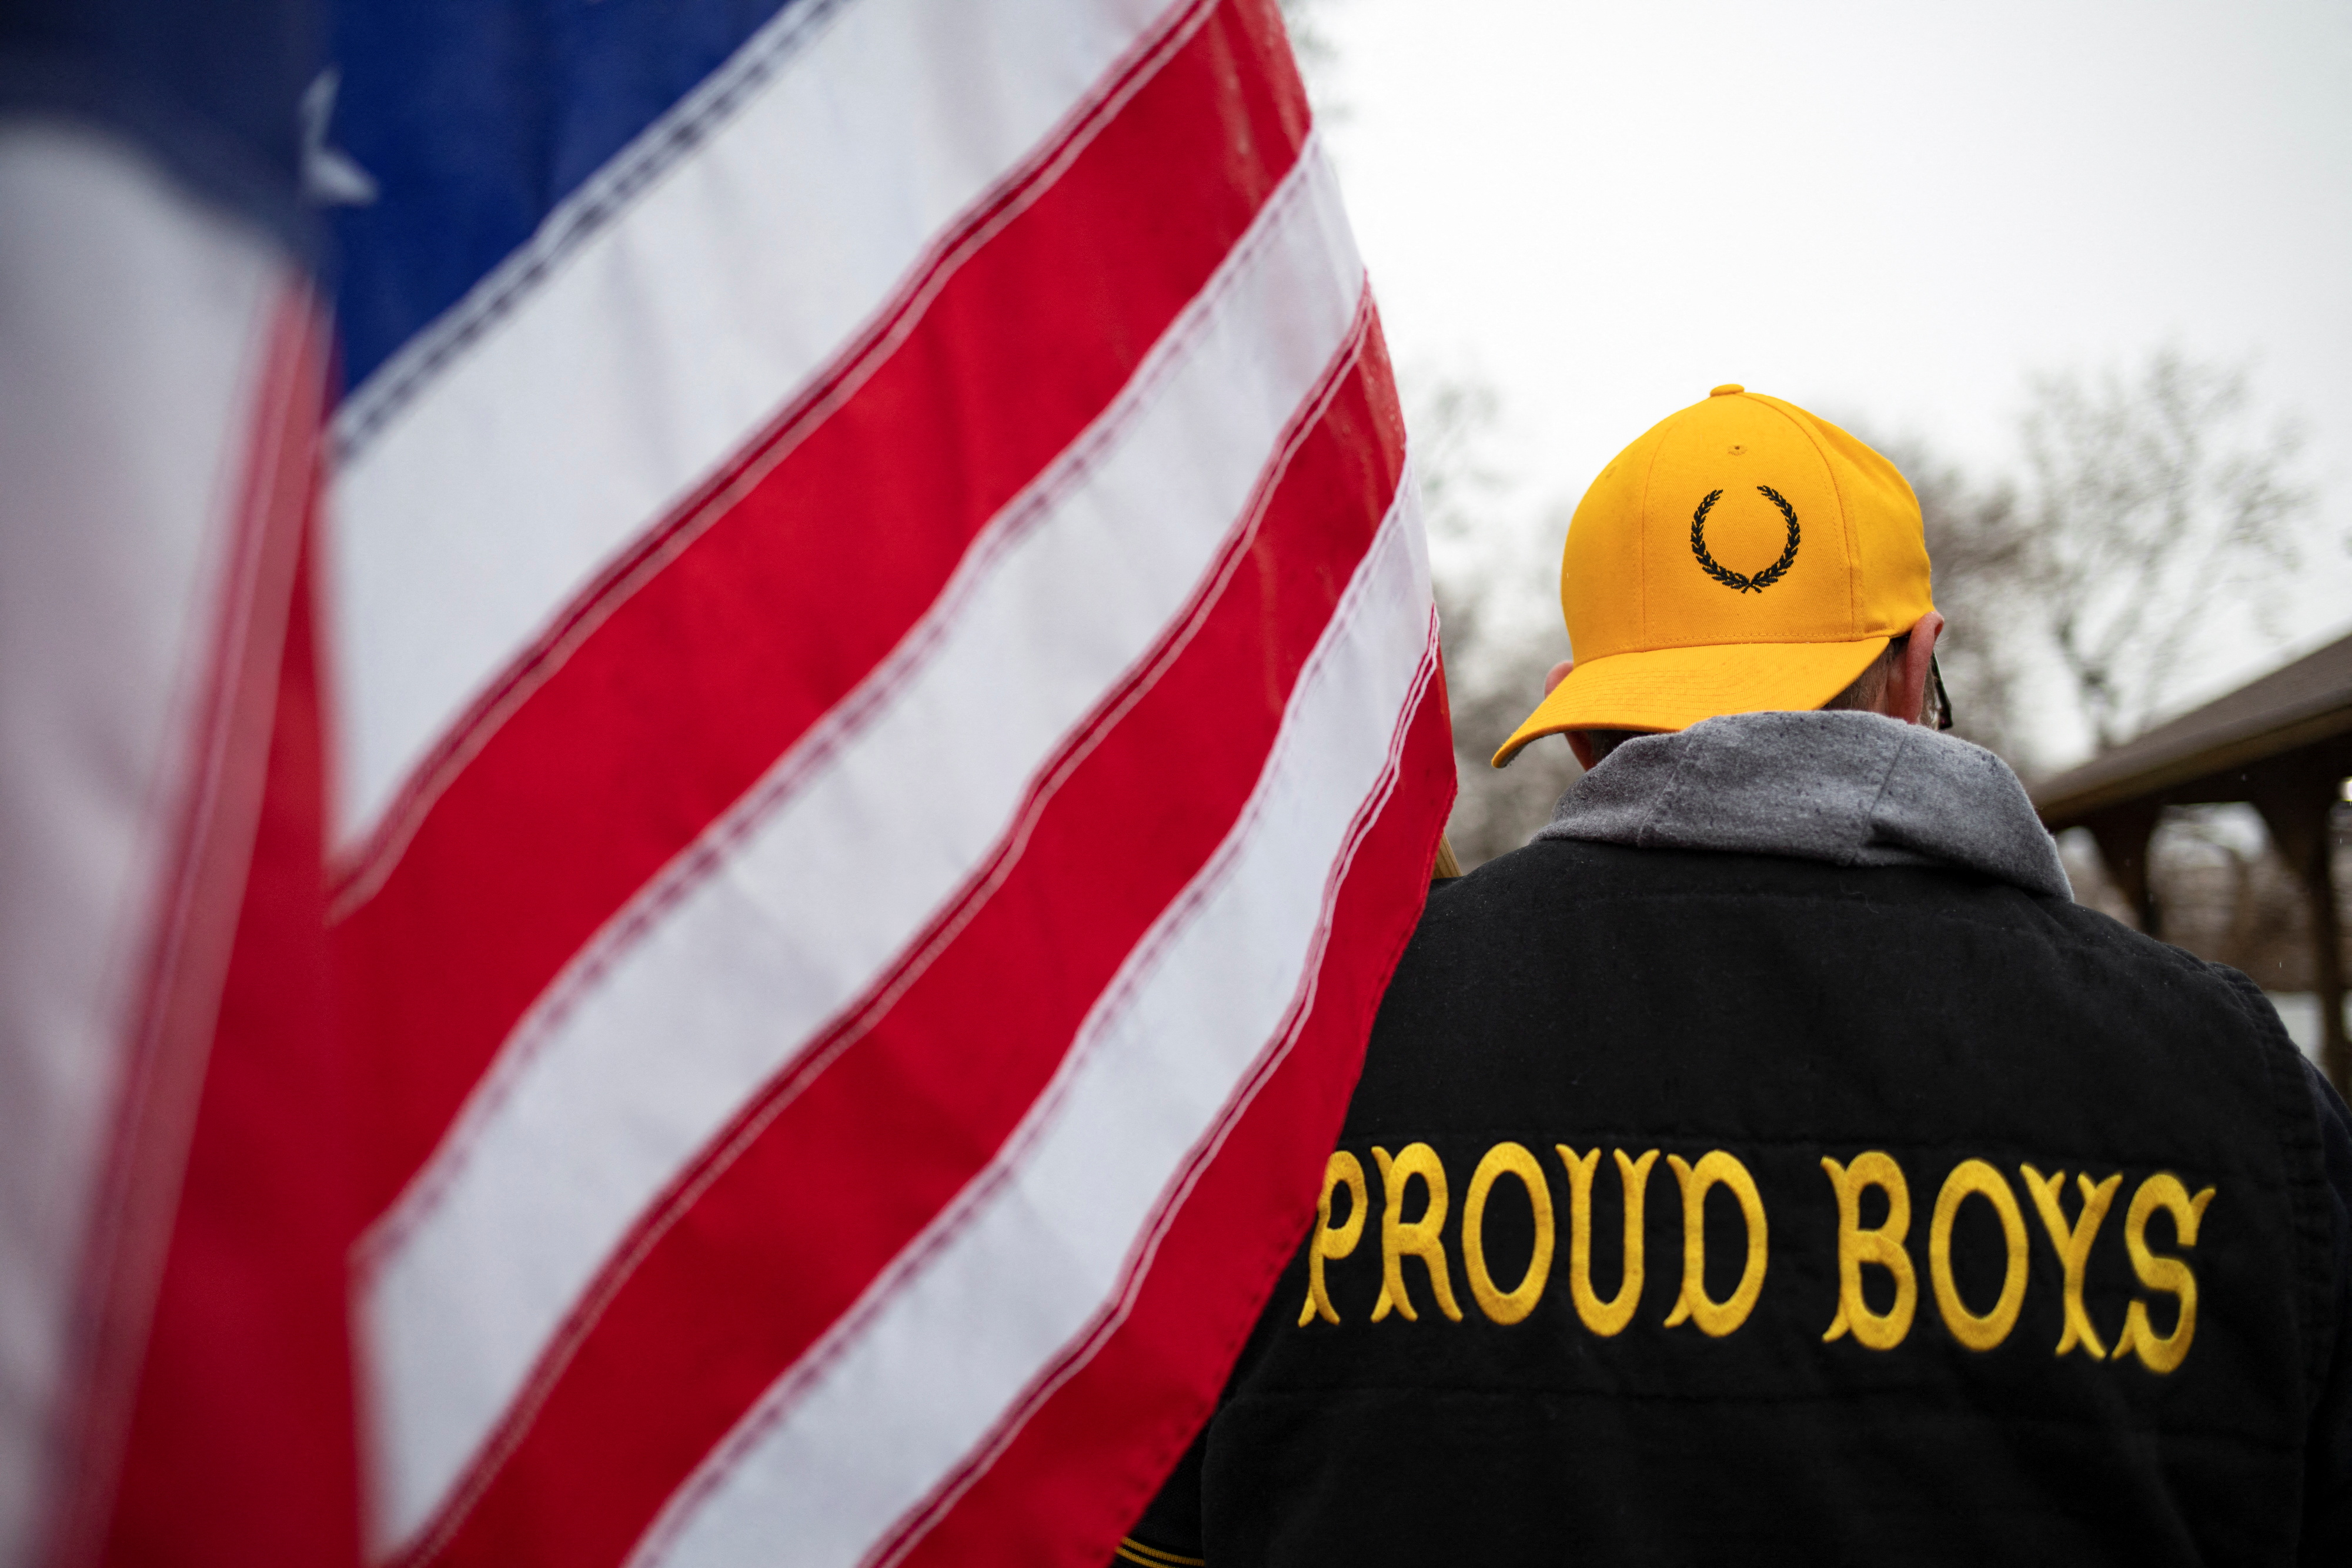 A member of the Proud Boys attends a "Let's Go Brandon Festival" rally in opposition to U.S. President Joe Biden, Ortonville, Michigan, November 20, 2021.  REUTERS/Emily Elconin/Files